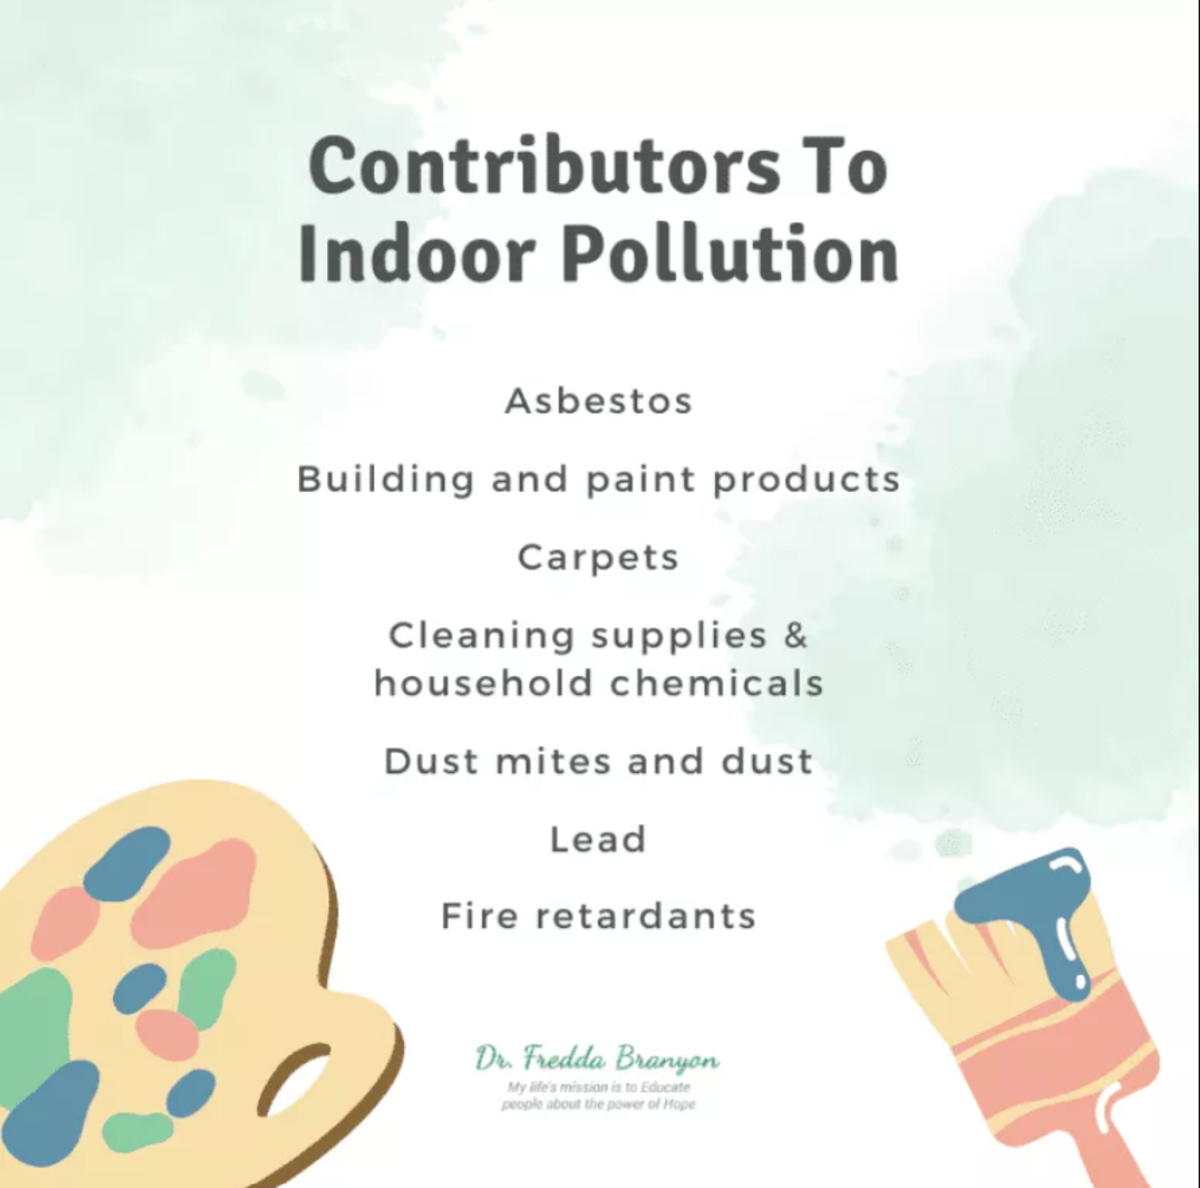 Improving Air Quality With Indoor Plants